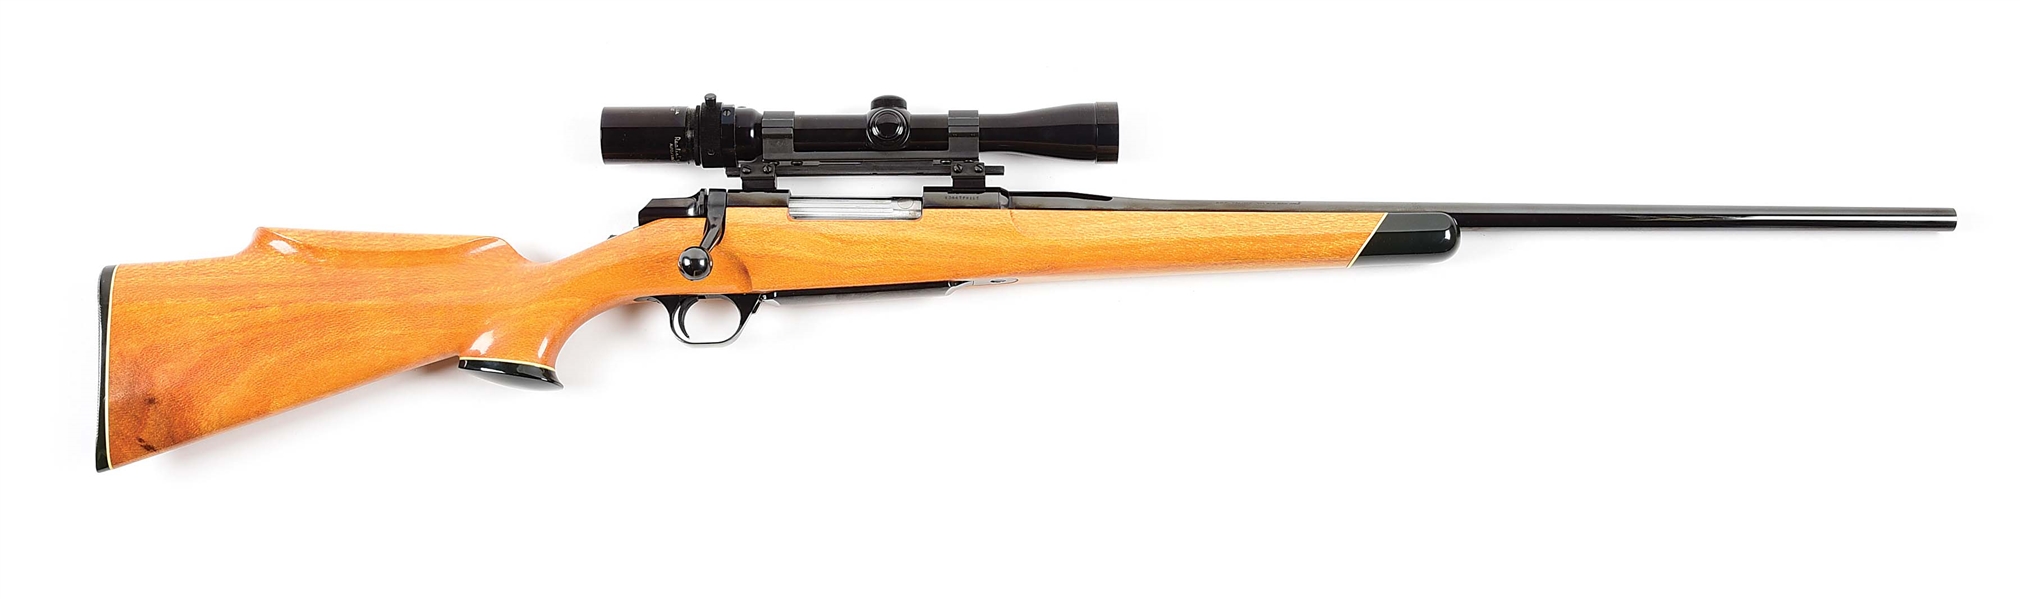 (M) BROWNING BBR BOLT ACTION RIFLE WITH SCOPE AND SILKY OAK STOCK.